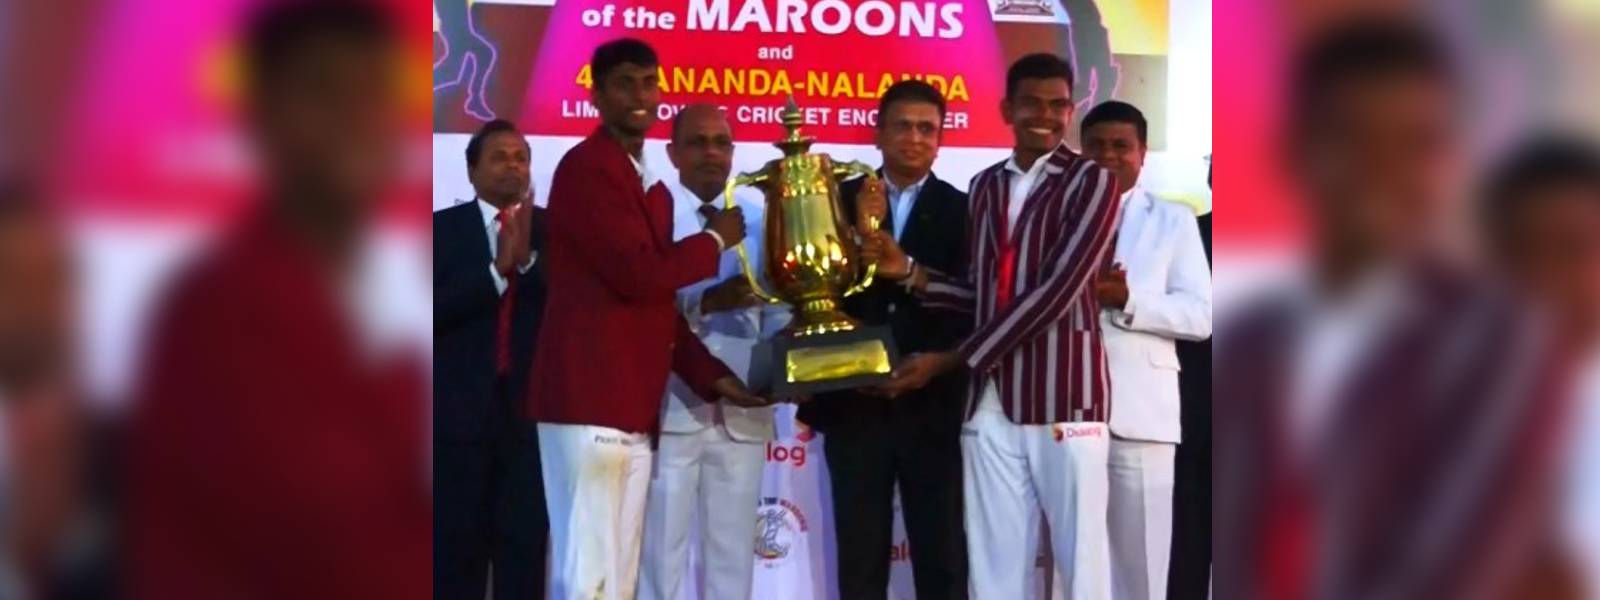 Battle of the Maroons ends in a draw